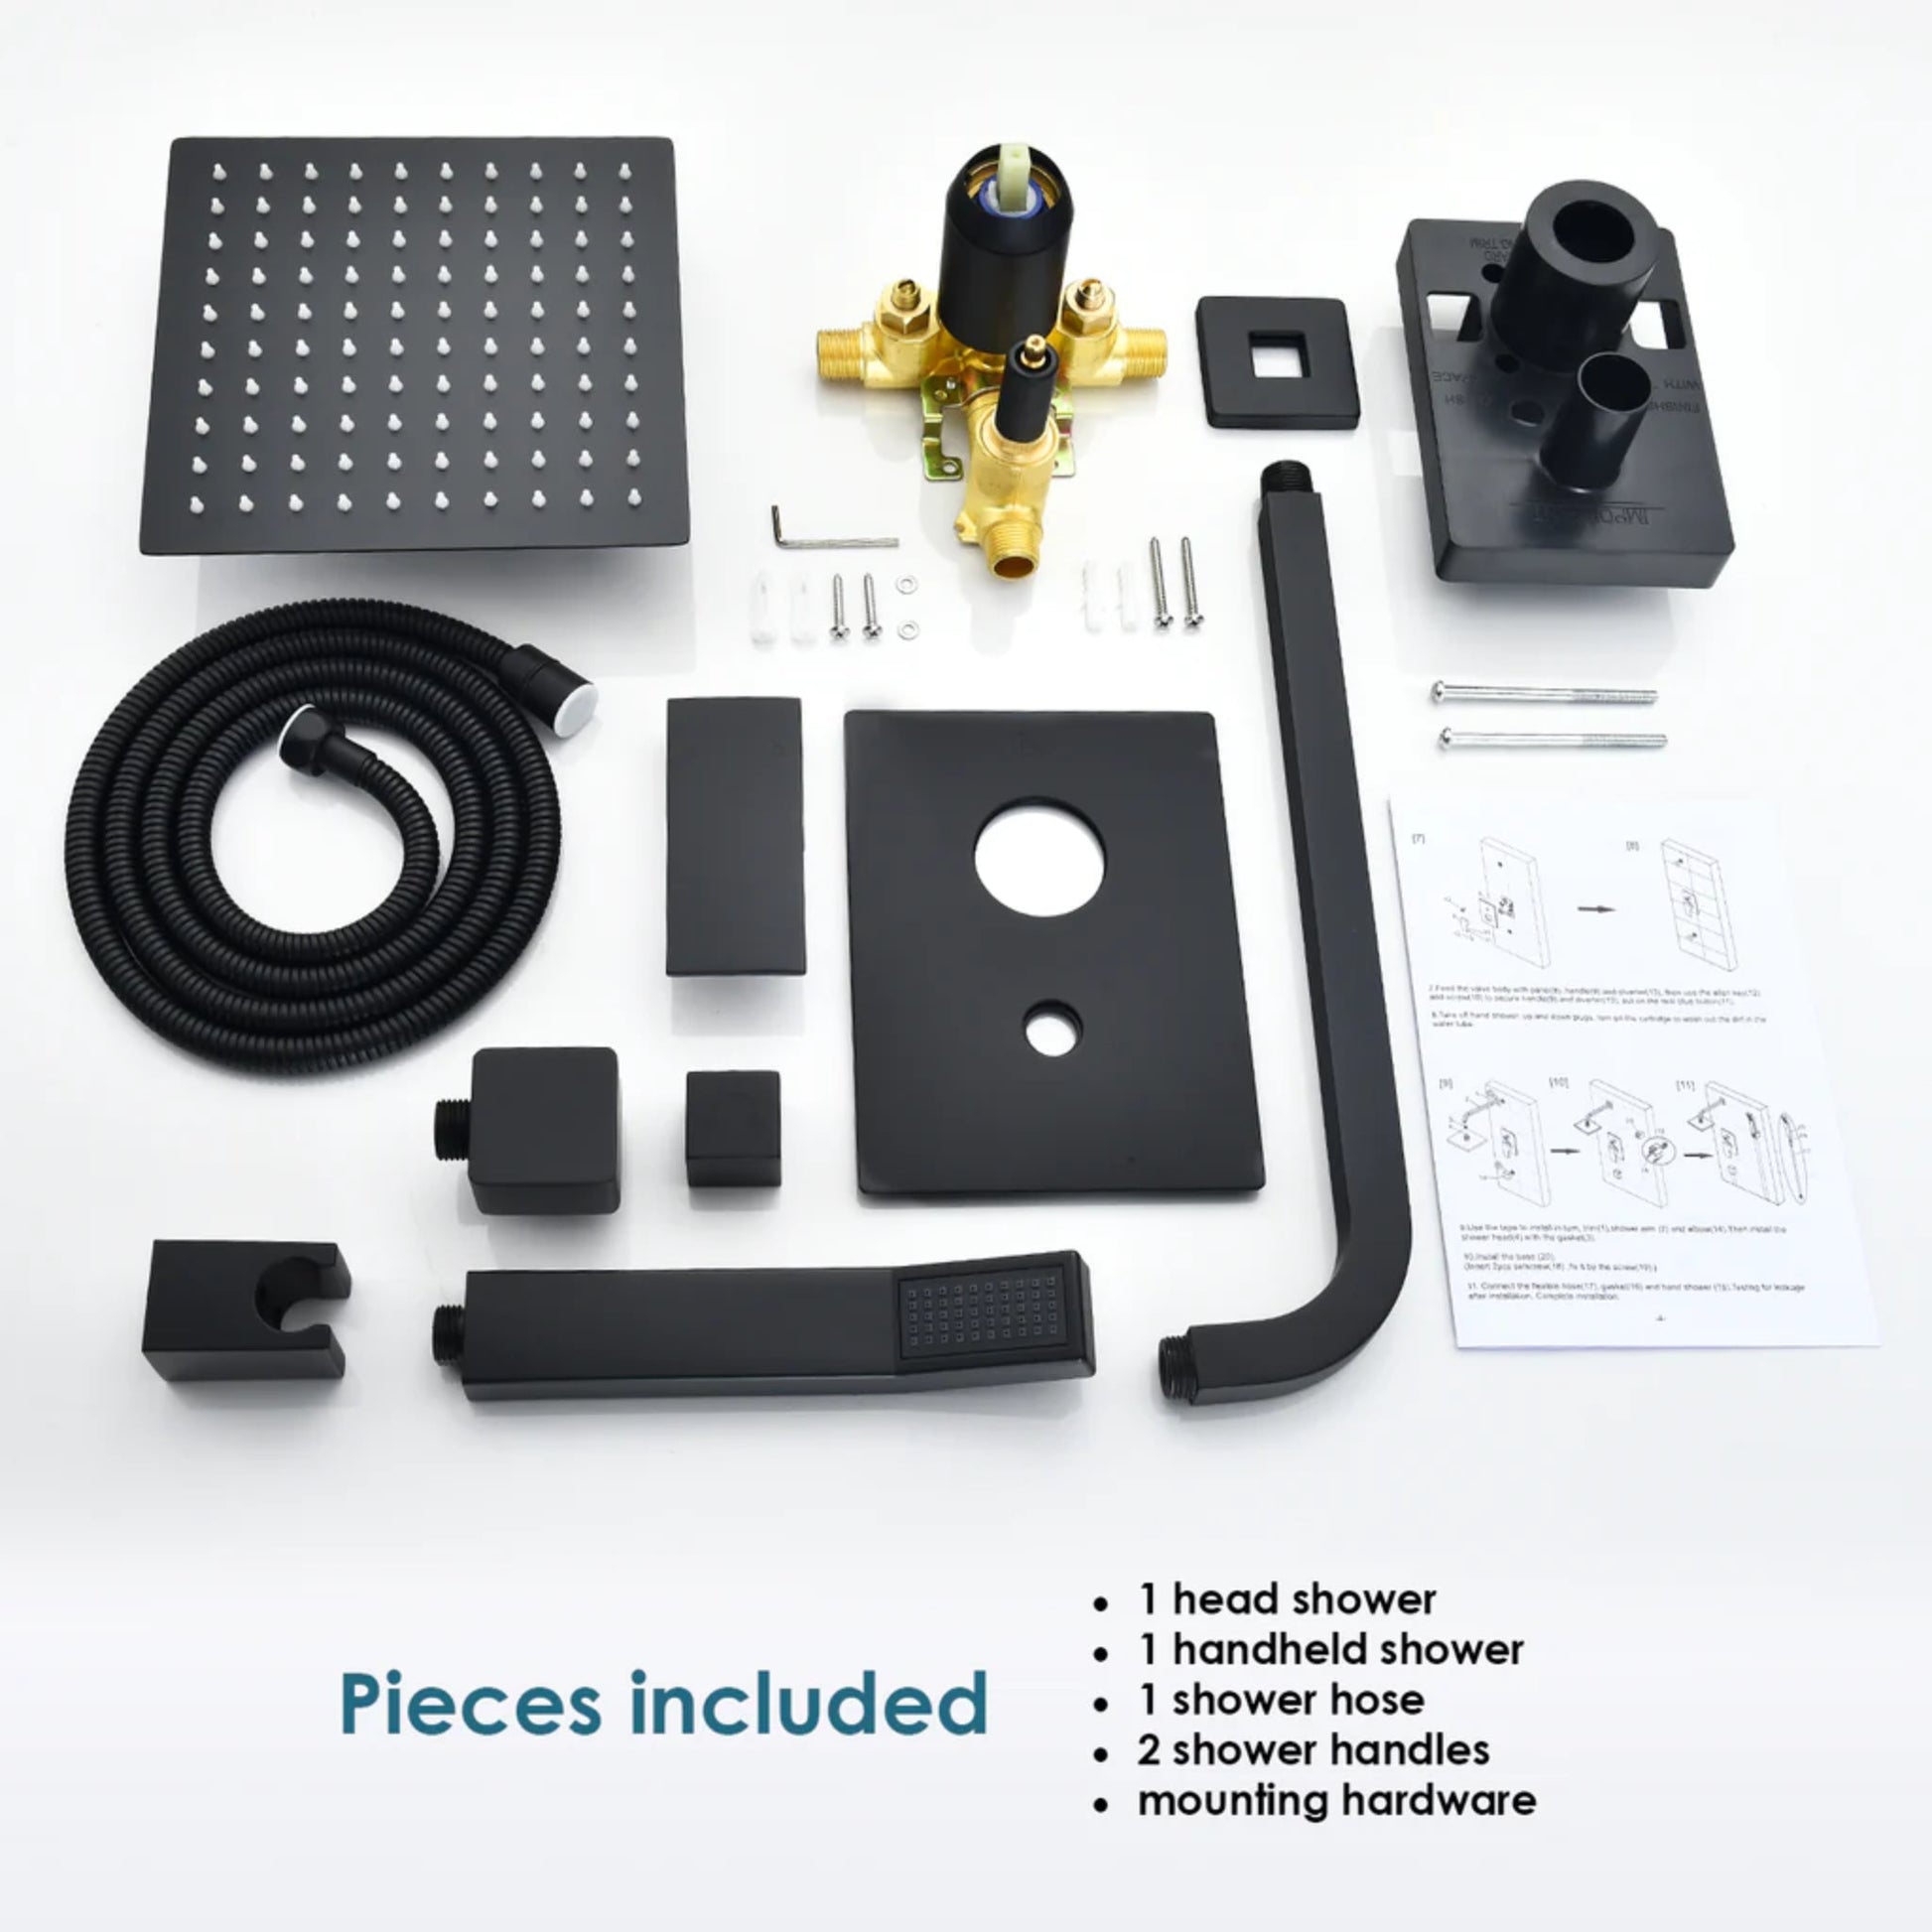 Altair Raeren Matte Black Complete Shower System With 8" Square Rain Shower Head and Rough-In Valve